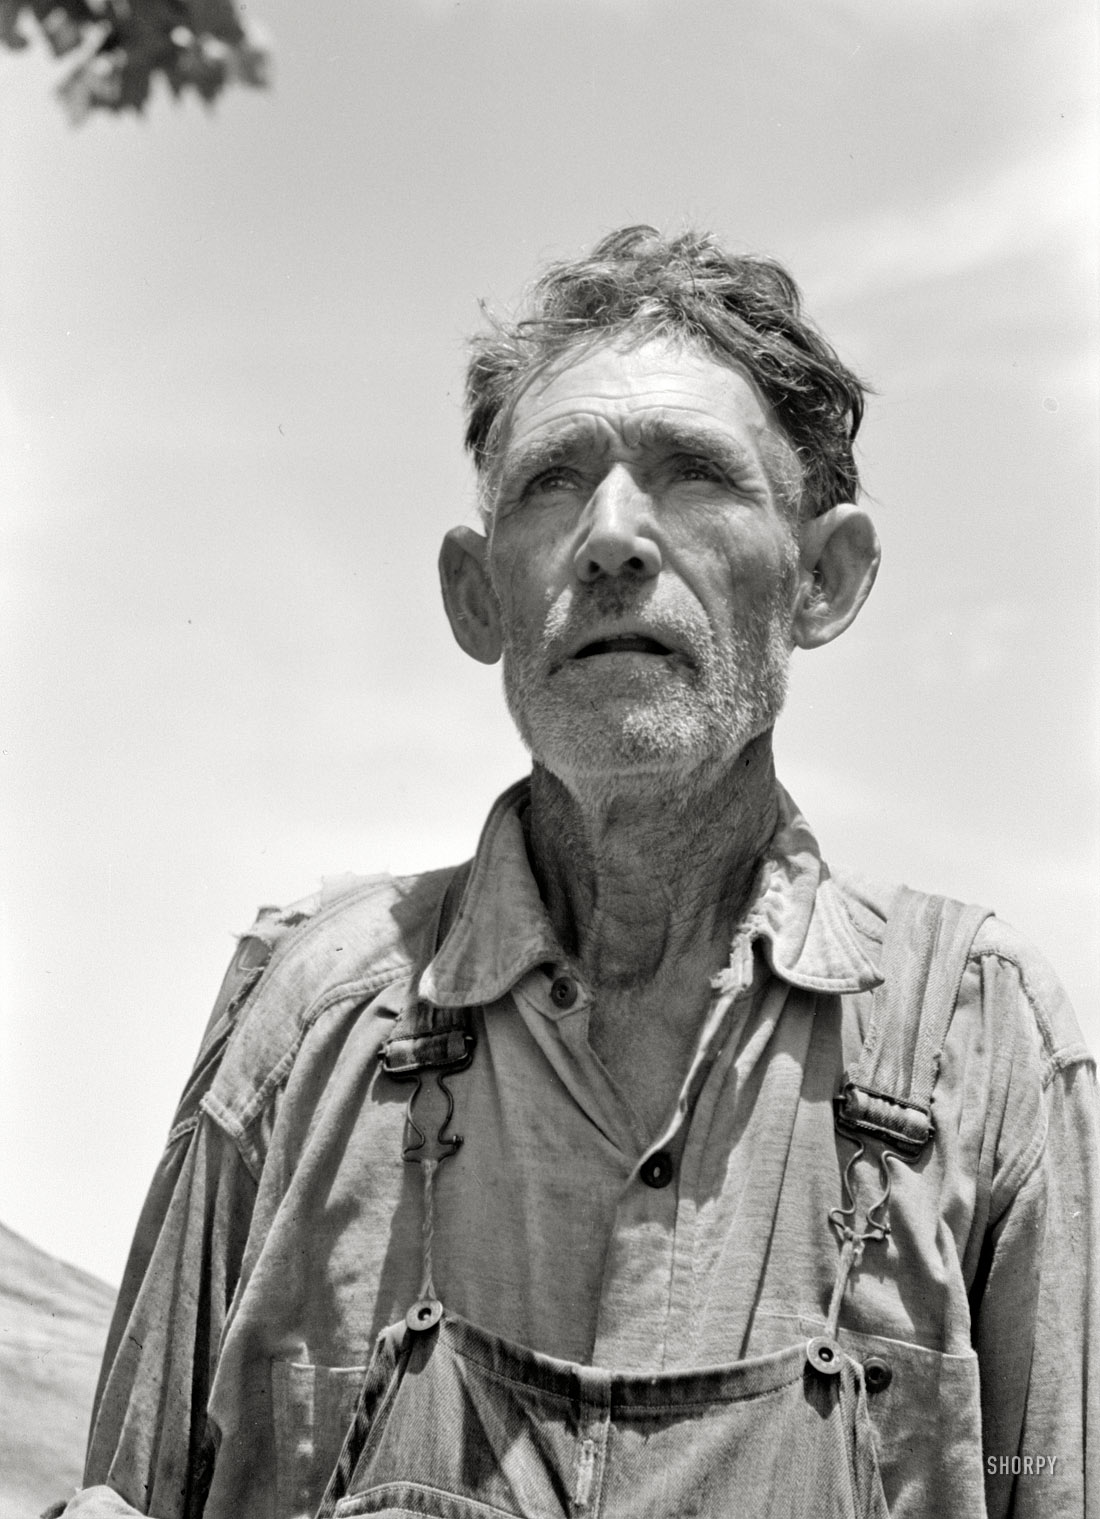 June 1939. "Veteran migrant agricultural worker camped in Wagoner County, Oklahoma. He has followed the road for about 30 years. When asked where his home was he said, 'It's all over.'" 35mm negative by Russell Lee. View full size.